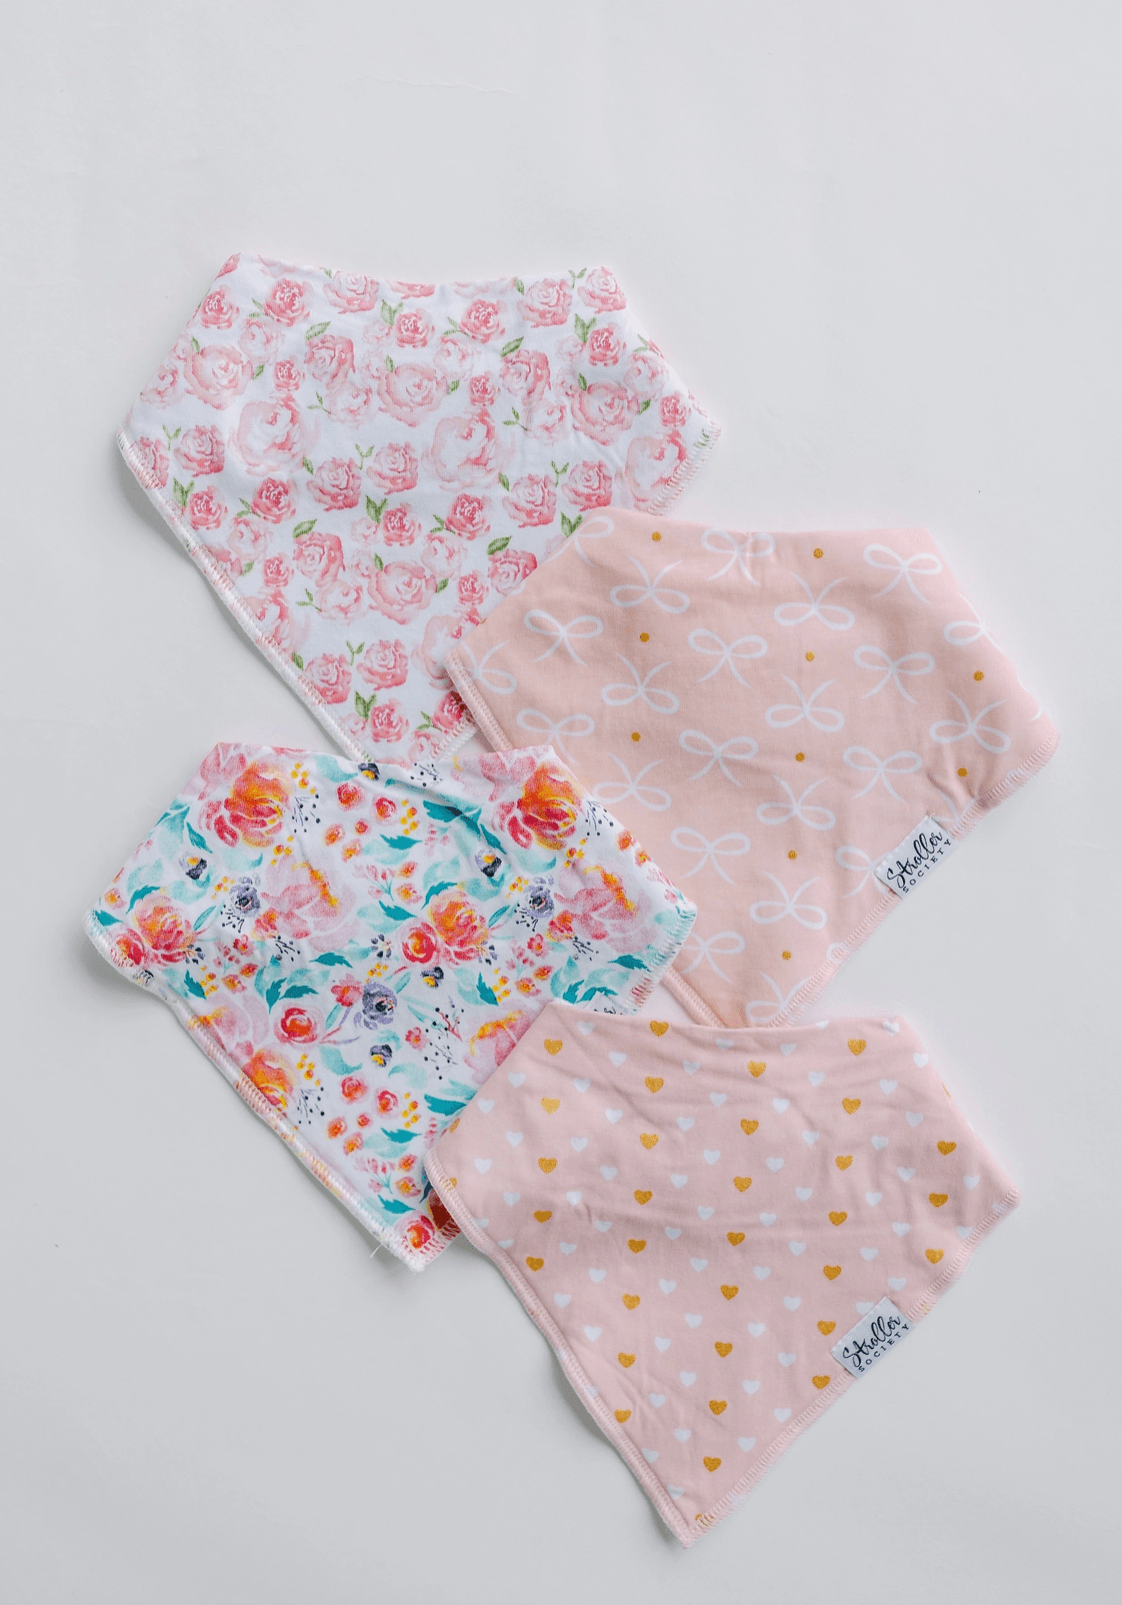 Baby Bandana Bibs - Flowers, Hearts and Bows baby essentials Maple & Co. Boutique   